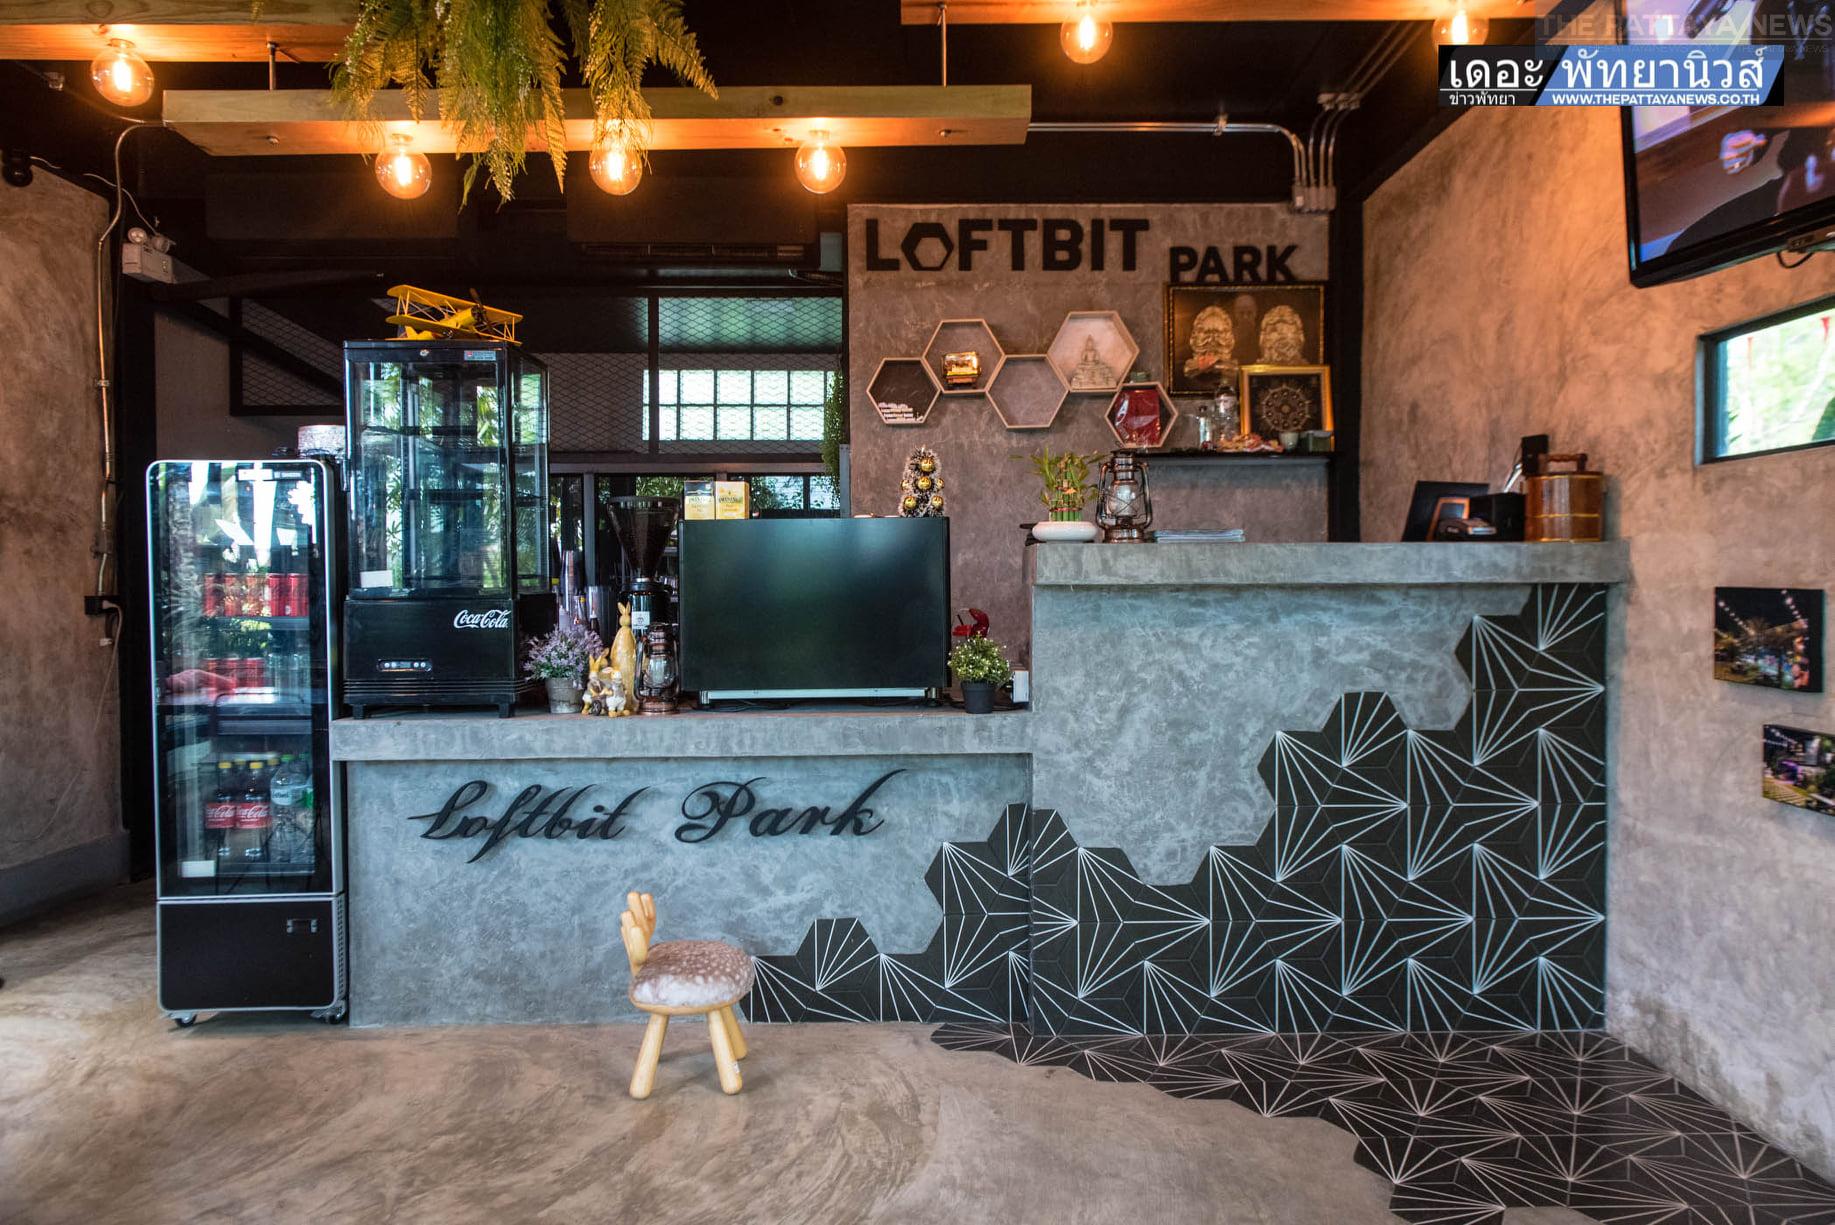 Loftbit Park — best cafe for animal lovers in the Pattaya area!